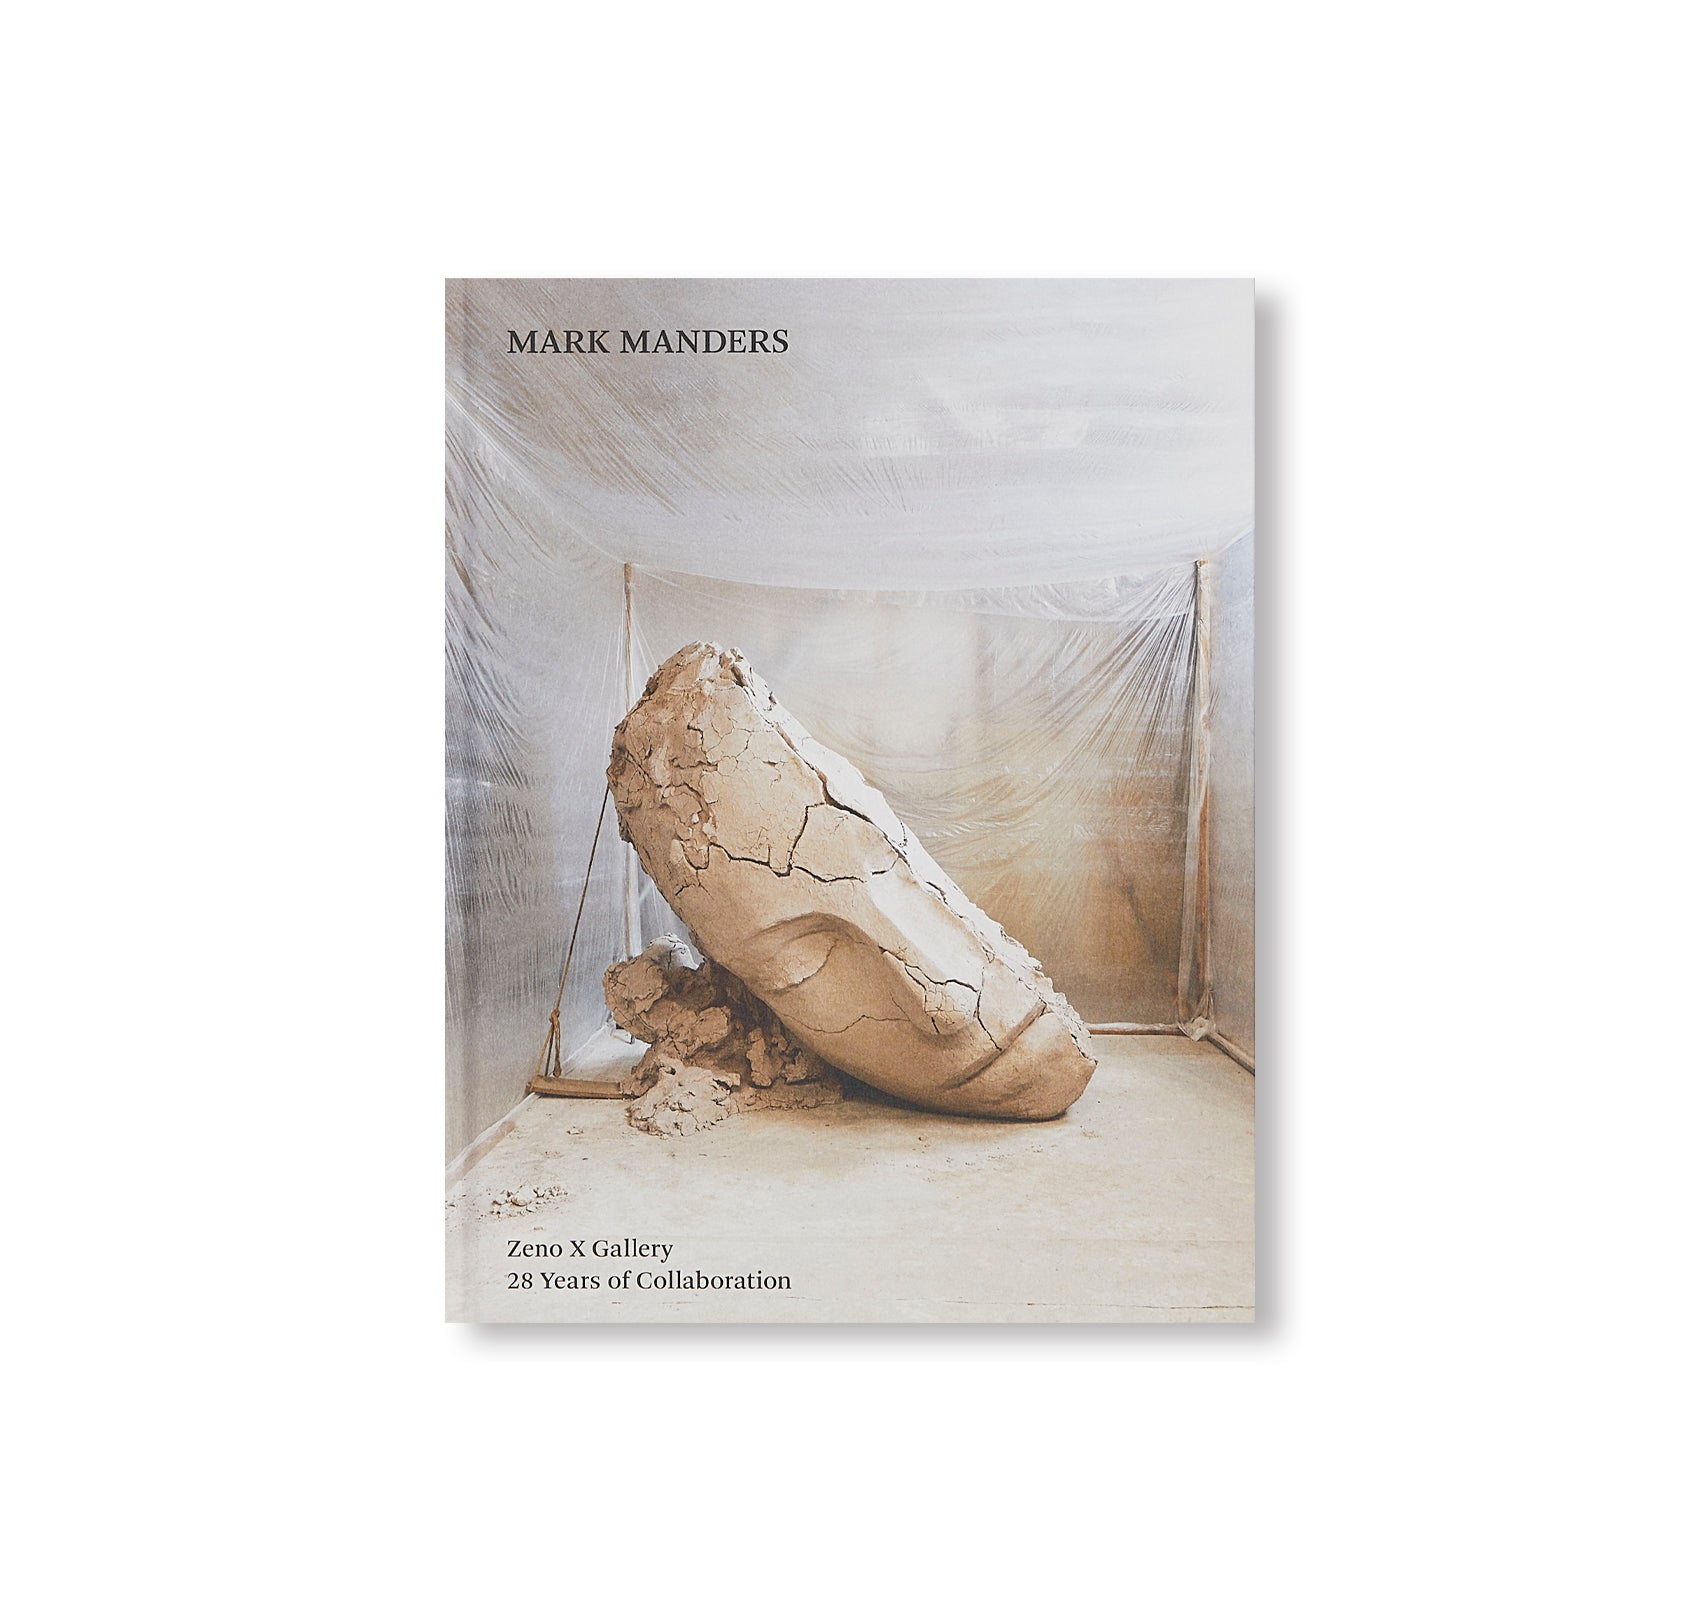 MARK MANDERS – ZENO X GALLERY, 28 YEARS OF COLLABORATION by Mark Manders